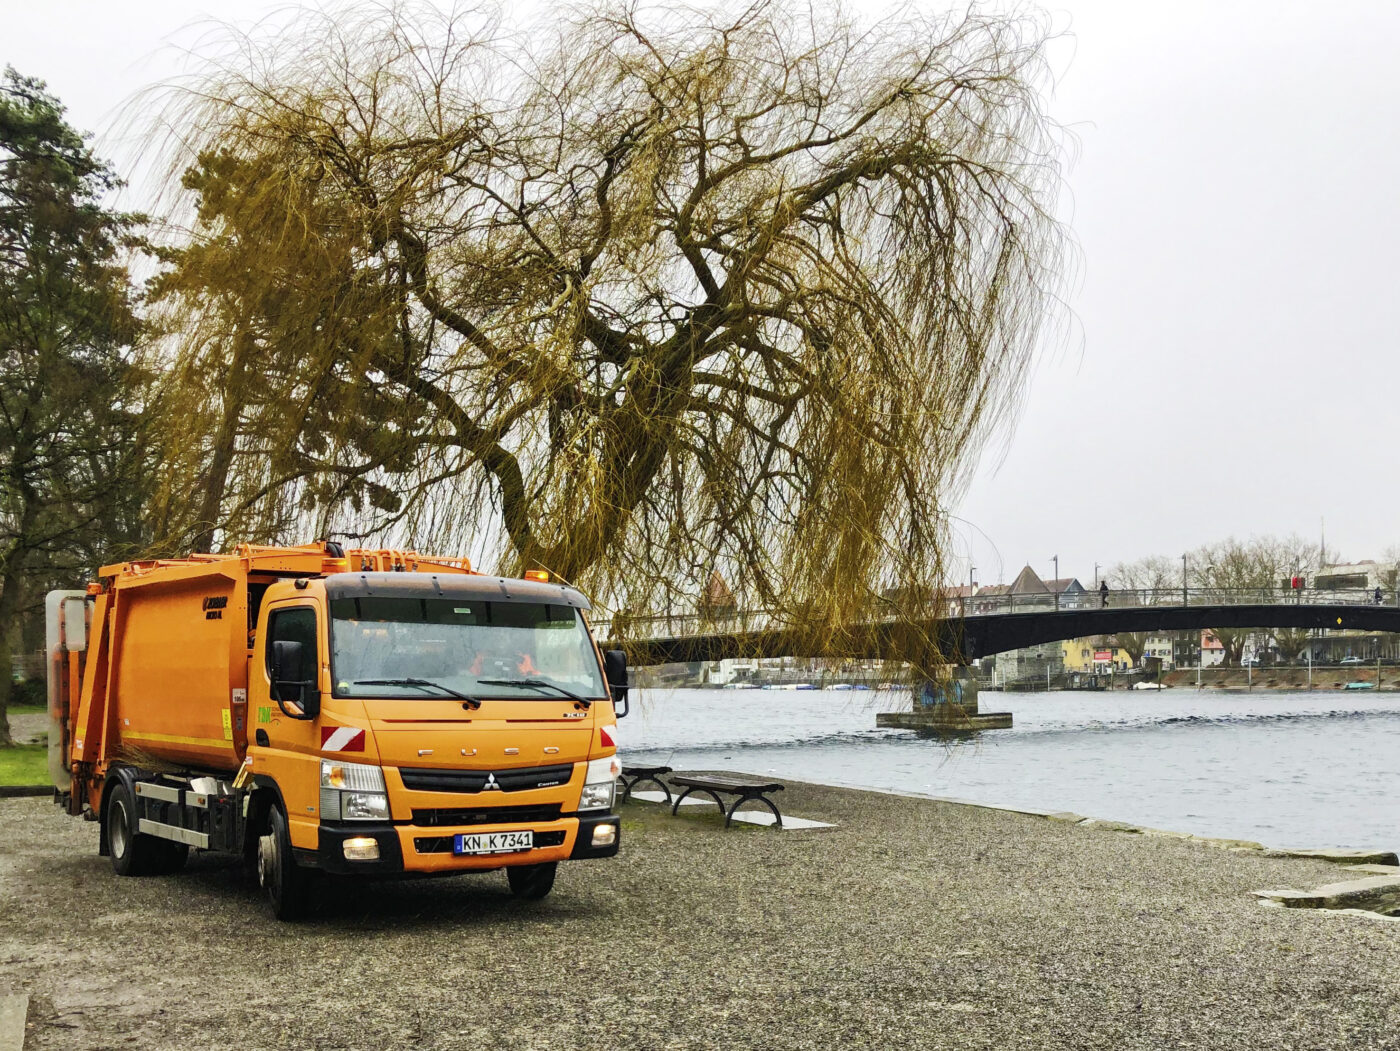 Maintaining and caring for the city's public spaces is the job of the Technische Betriebe Konstanz (TBK). The team of the municipal company also includes several FUSO Canters.